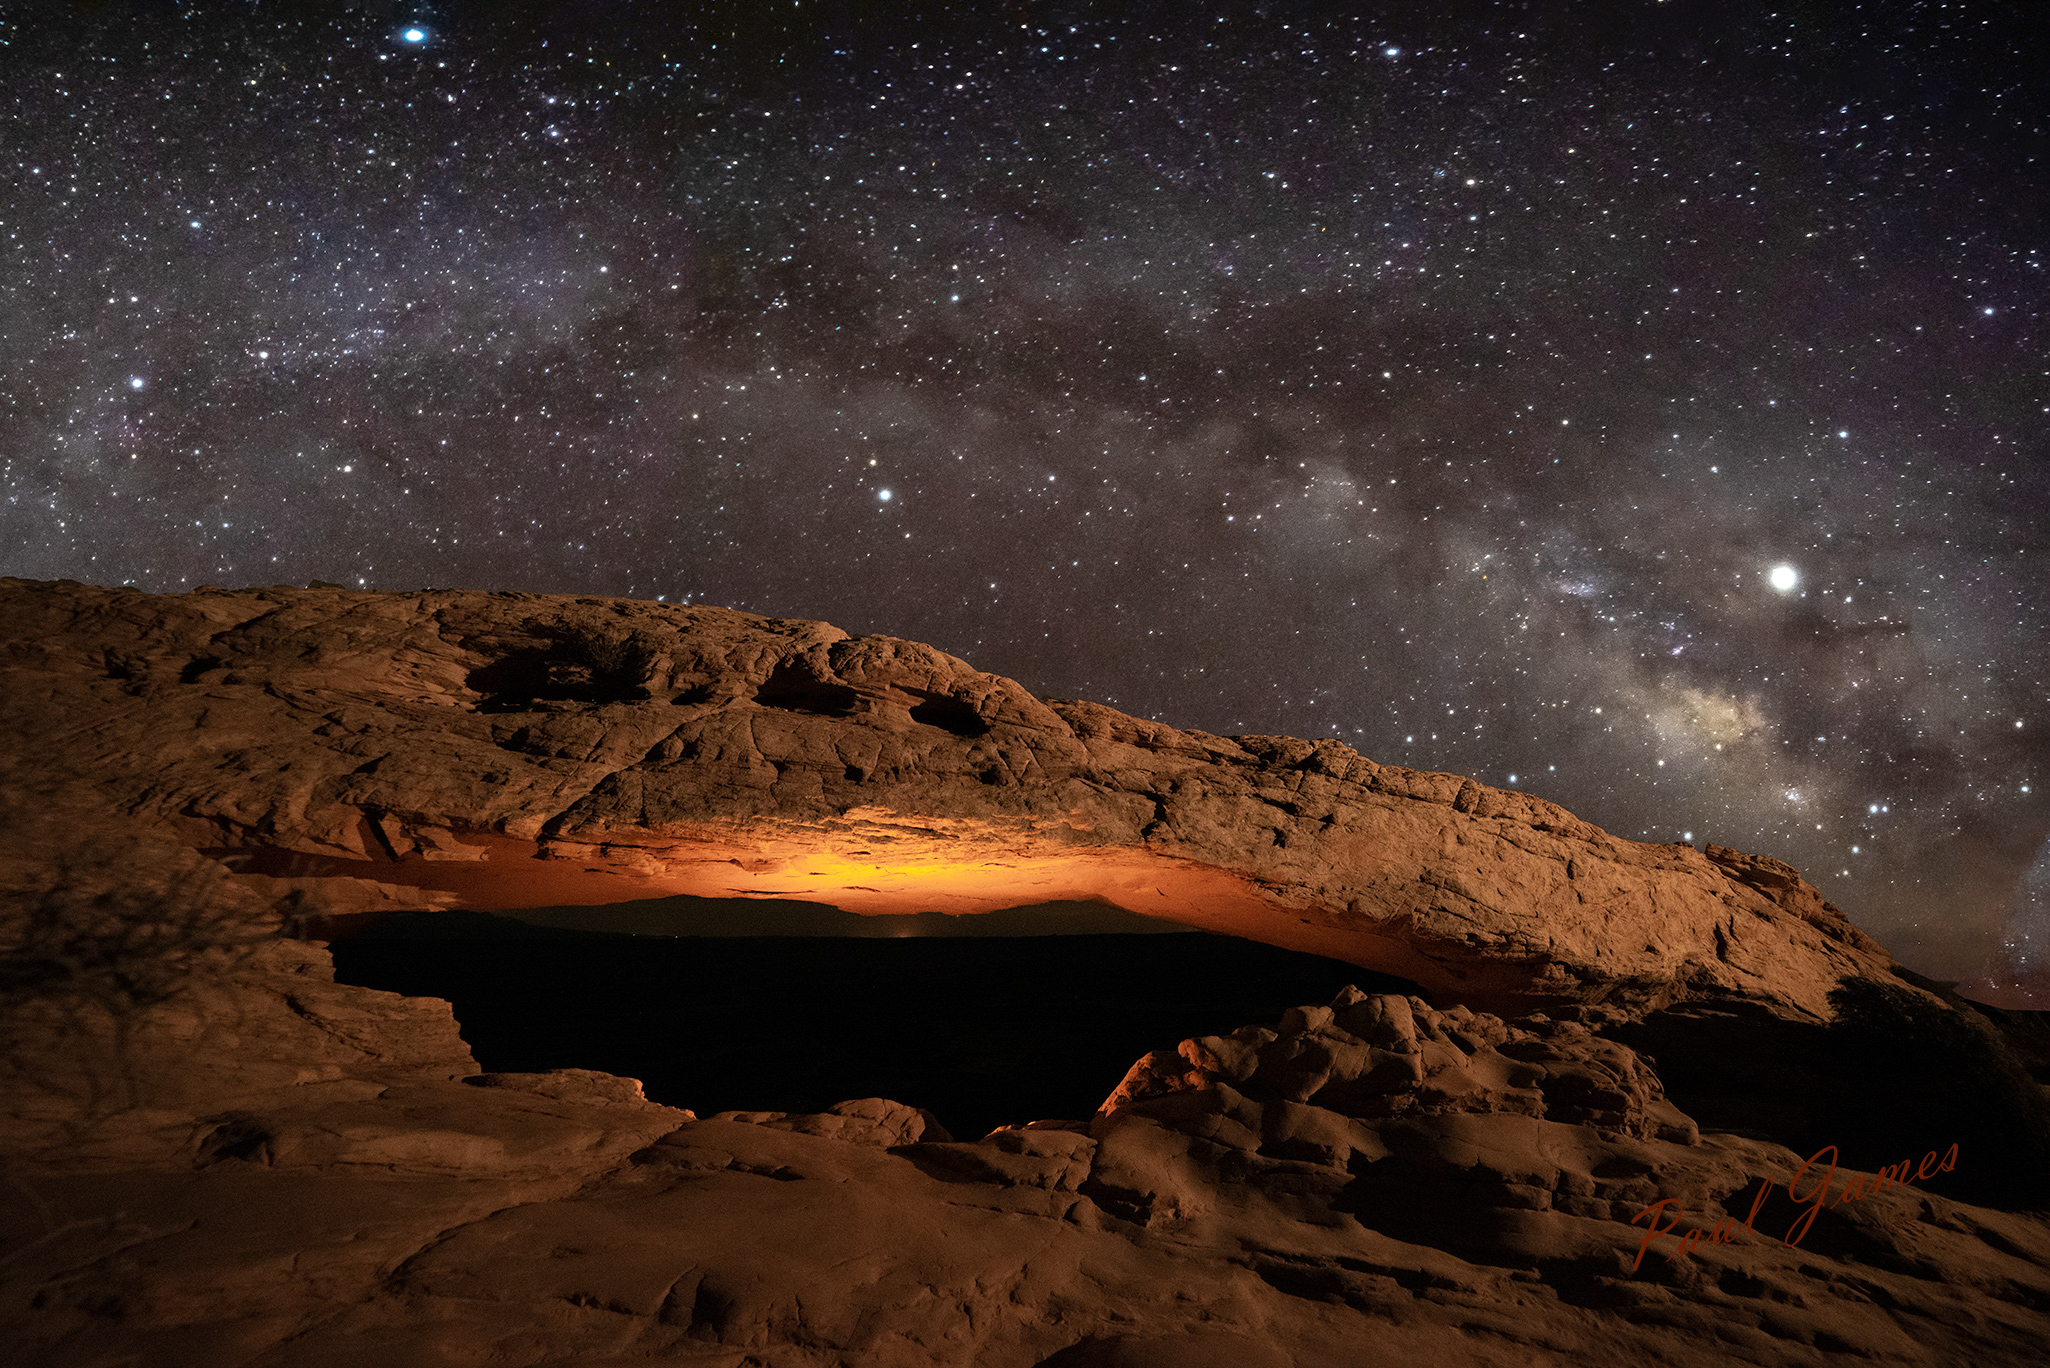 Arches, Canyonlands, and Dead Horse Point /Dark Sky Photographic field workshop